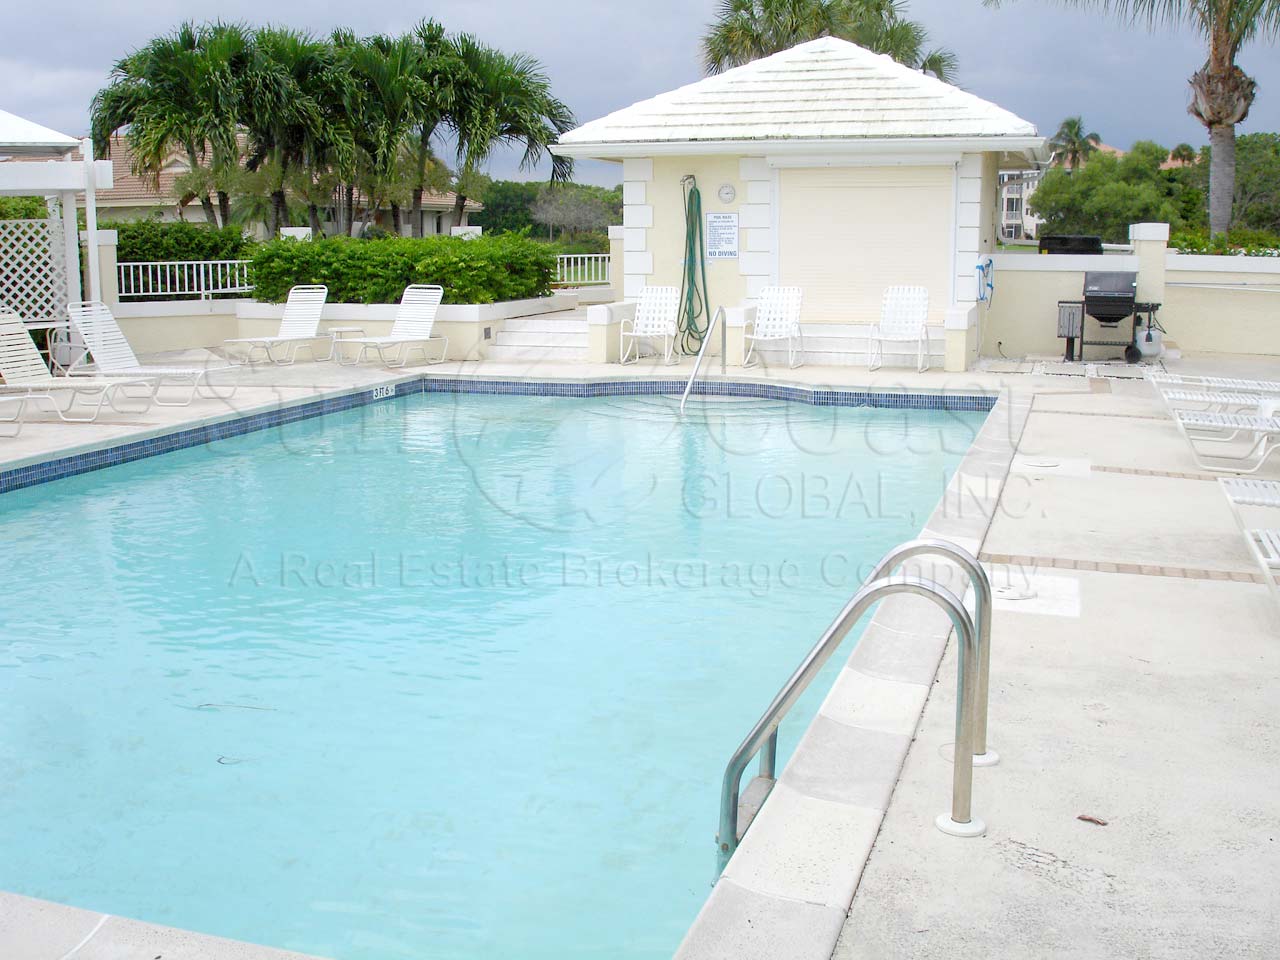 Morningstar at Windstar 3-1/2-5 ft pool with grill & restrooms